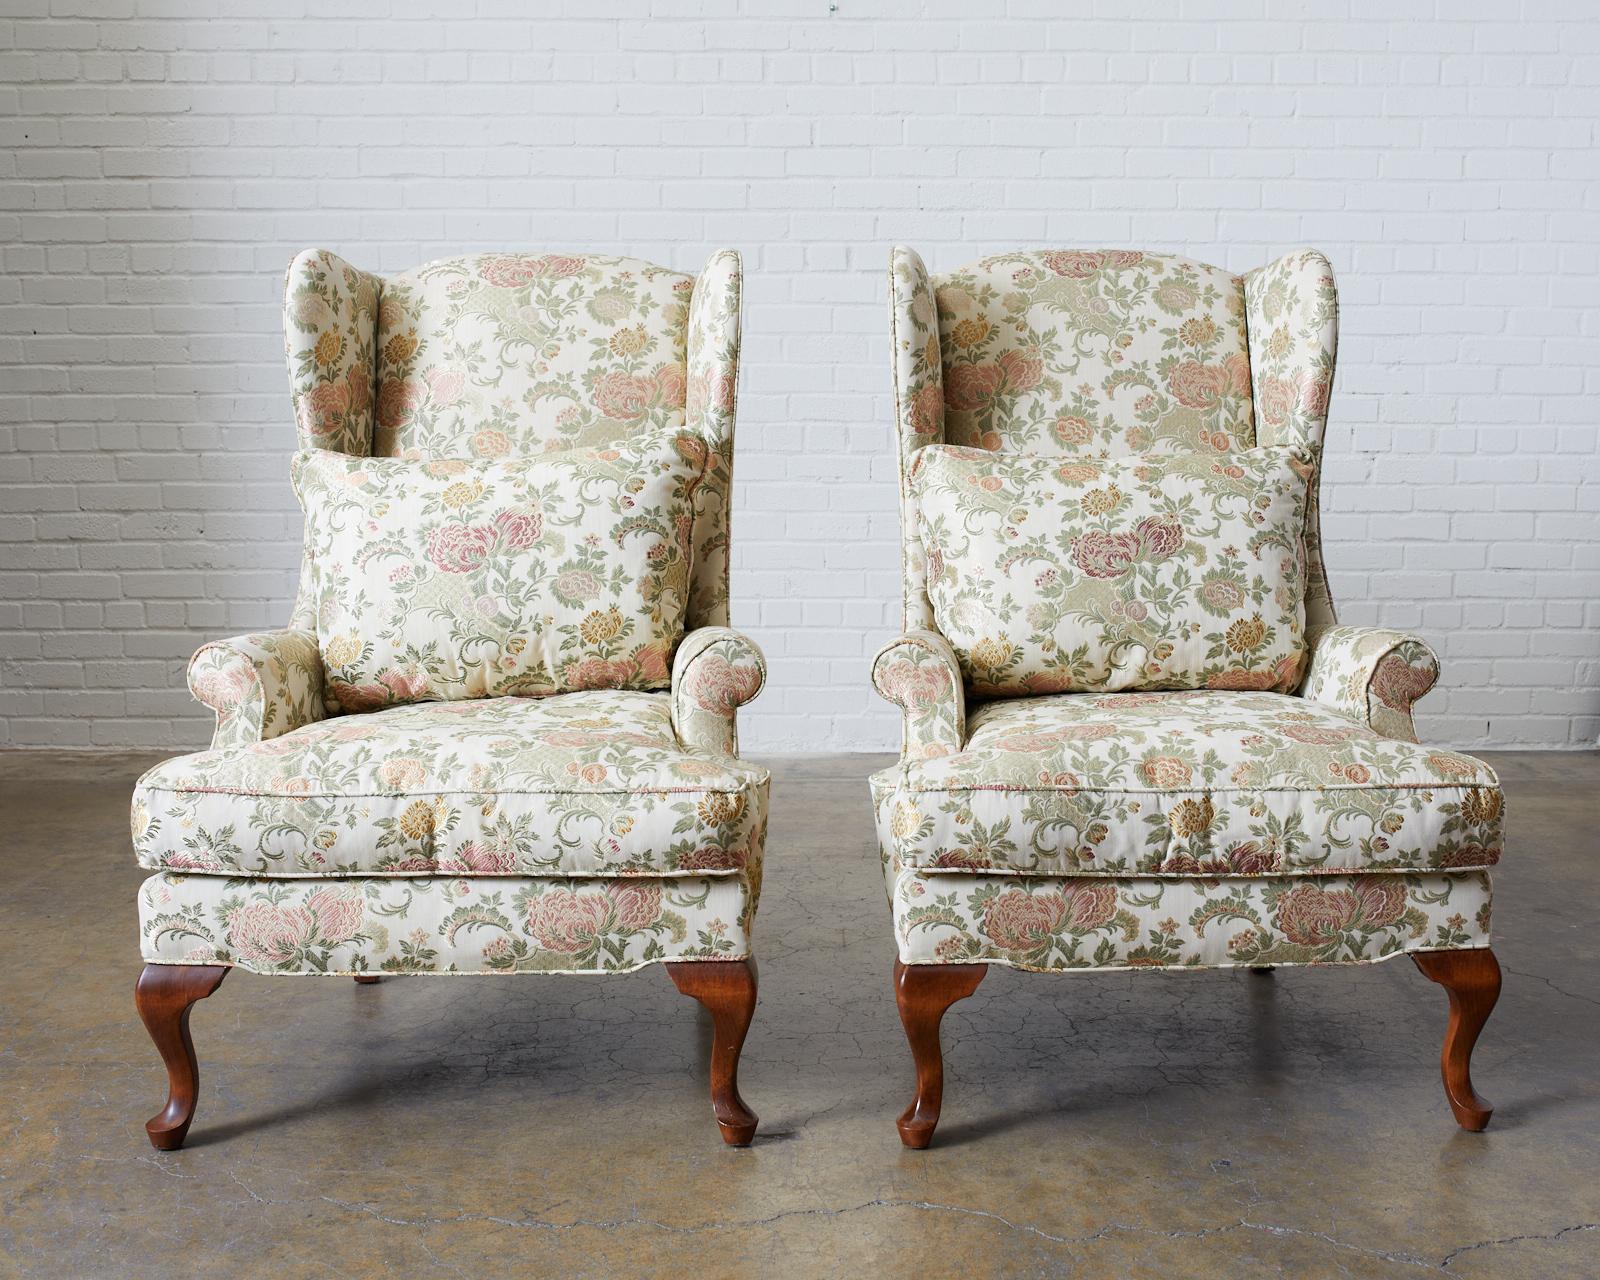 Pair of elegant wingback chairs made in the George II style. Featuring a lovely brocade upholstery of foliate and chrysanthemum patterns over a cream background. Supported by carved cabriole legs in the front and splayed legs in the rear. Large high